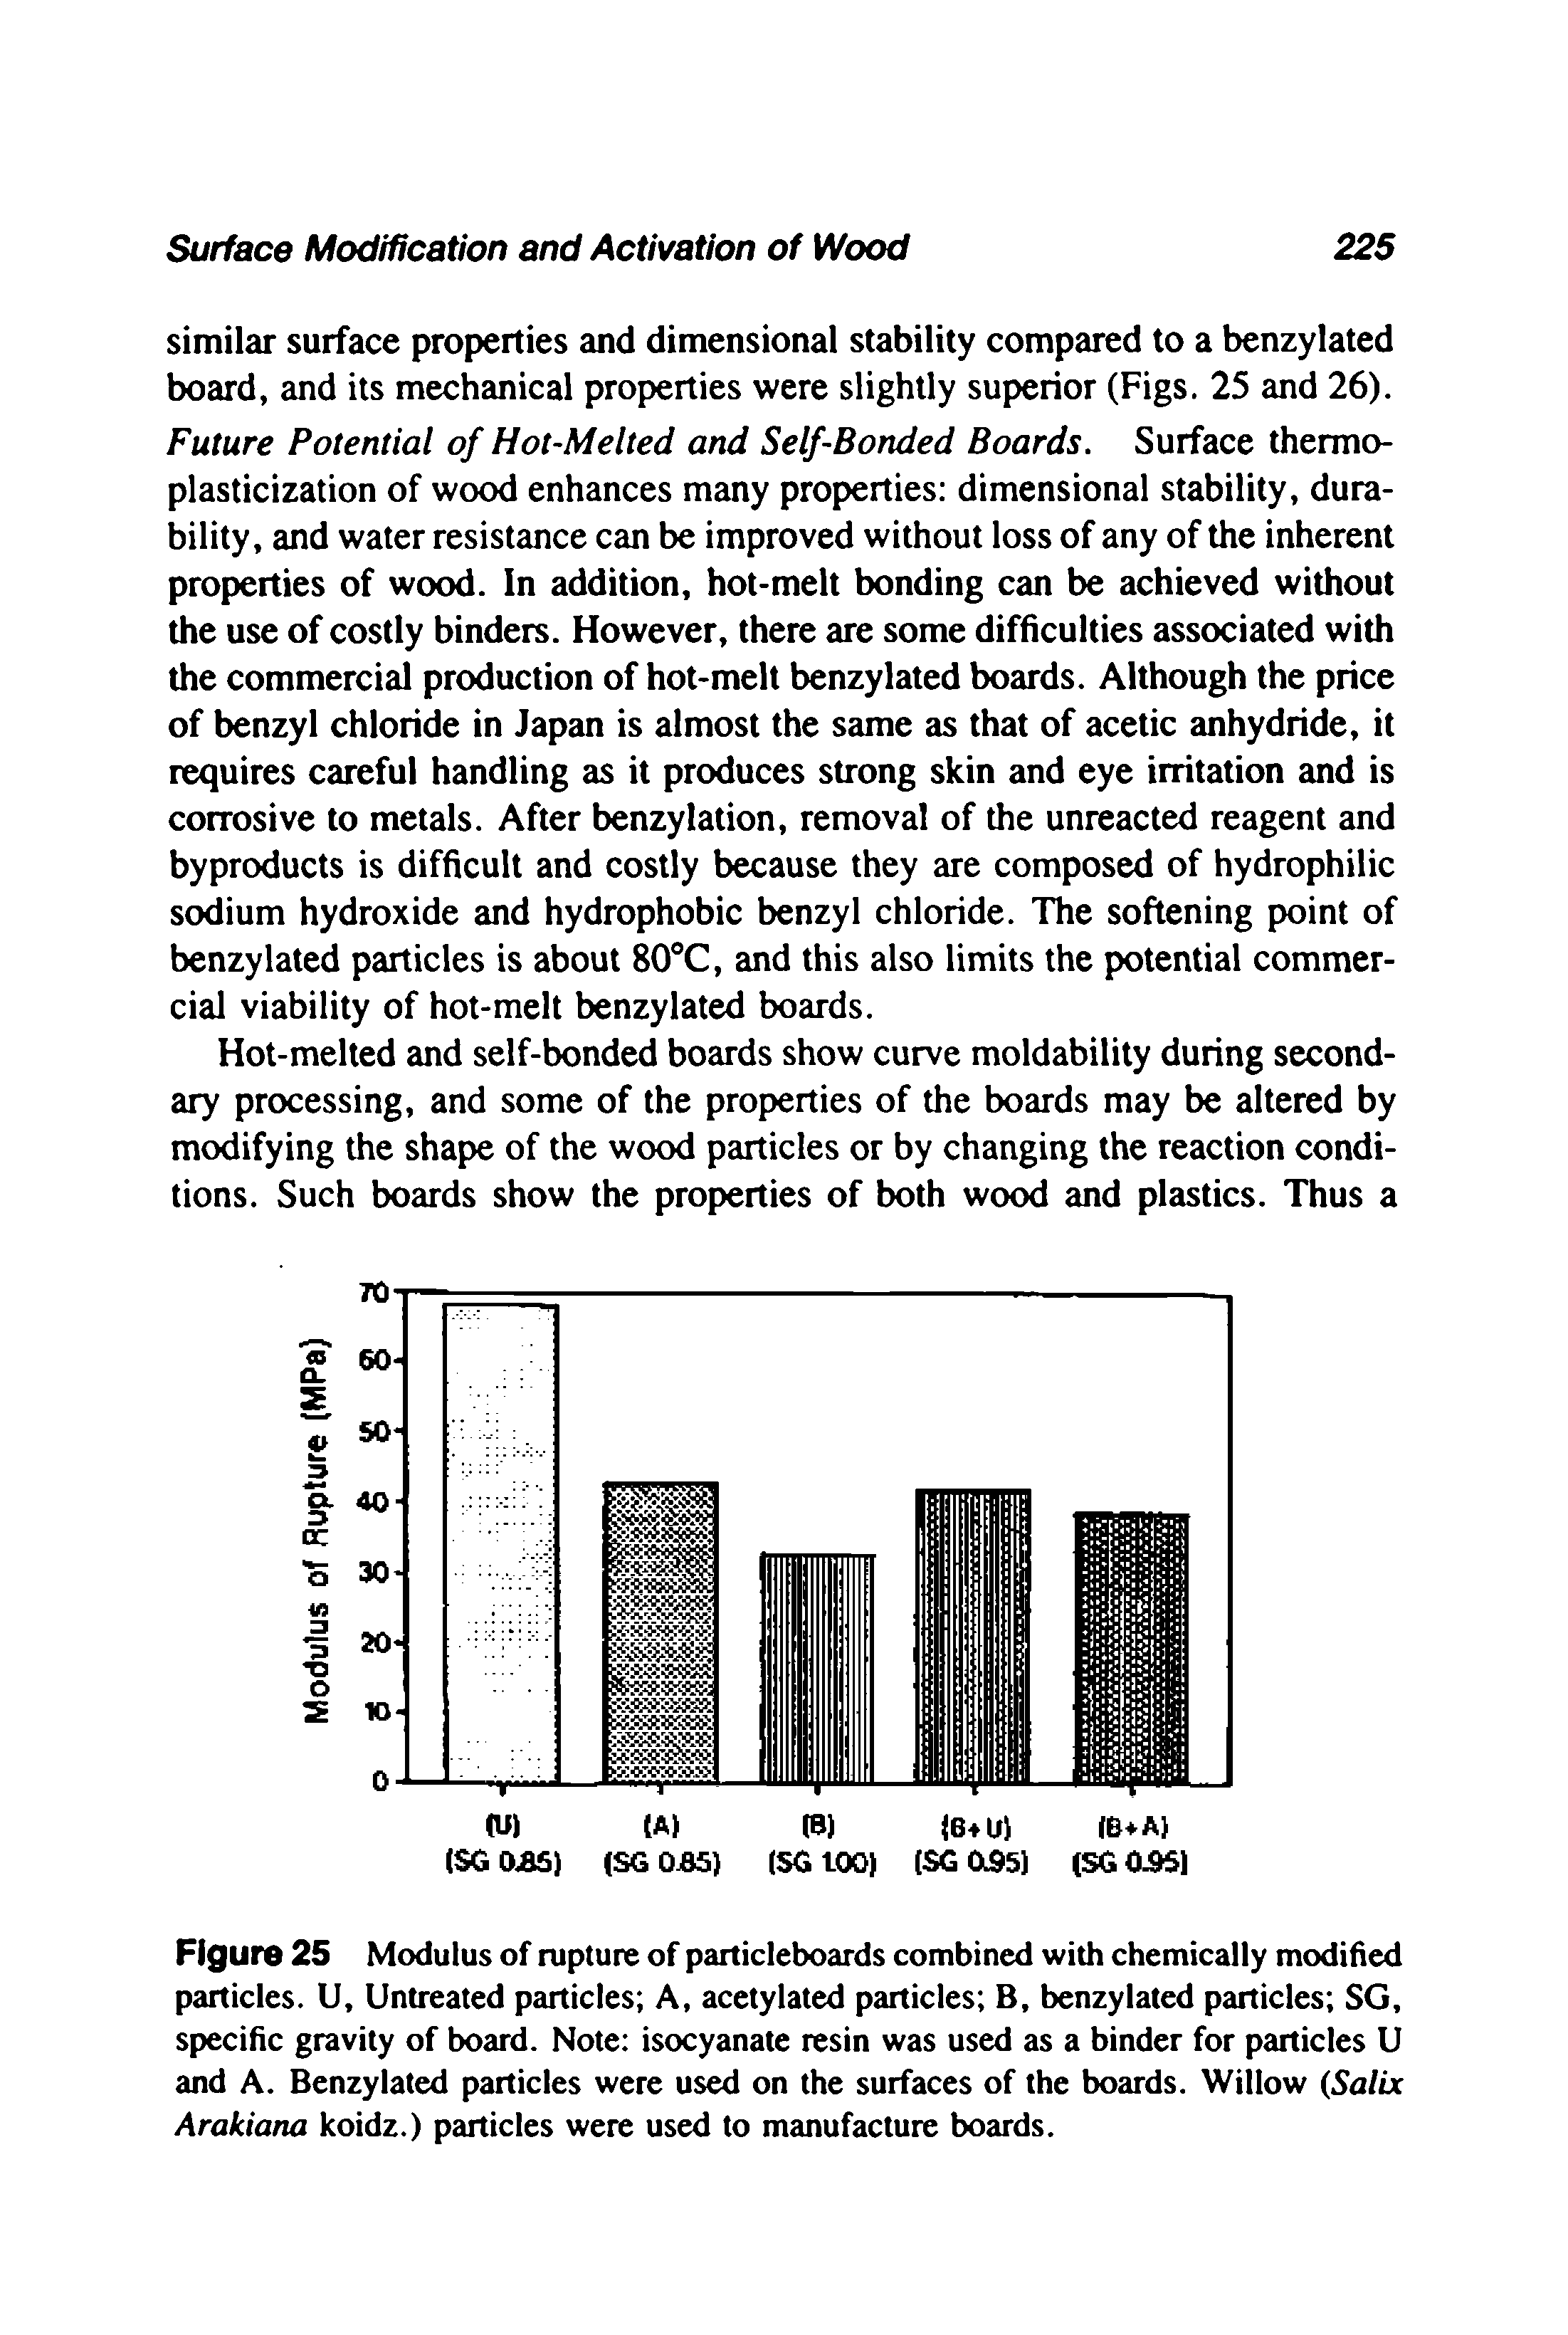 Figure 25 Modulus of rupture of particleboards combined with chemically modified particles. U, Untreated particles A, acetylated particles B, benzylated particles SG, specific gravity of board. Note isocyanate resin was used as a binder for particles U and A. Benzylated particles were used on the surfaces of the boards. Willow Salix Arakiana koidz.) particles were used to manufacture boards.